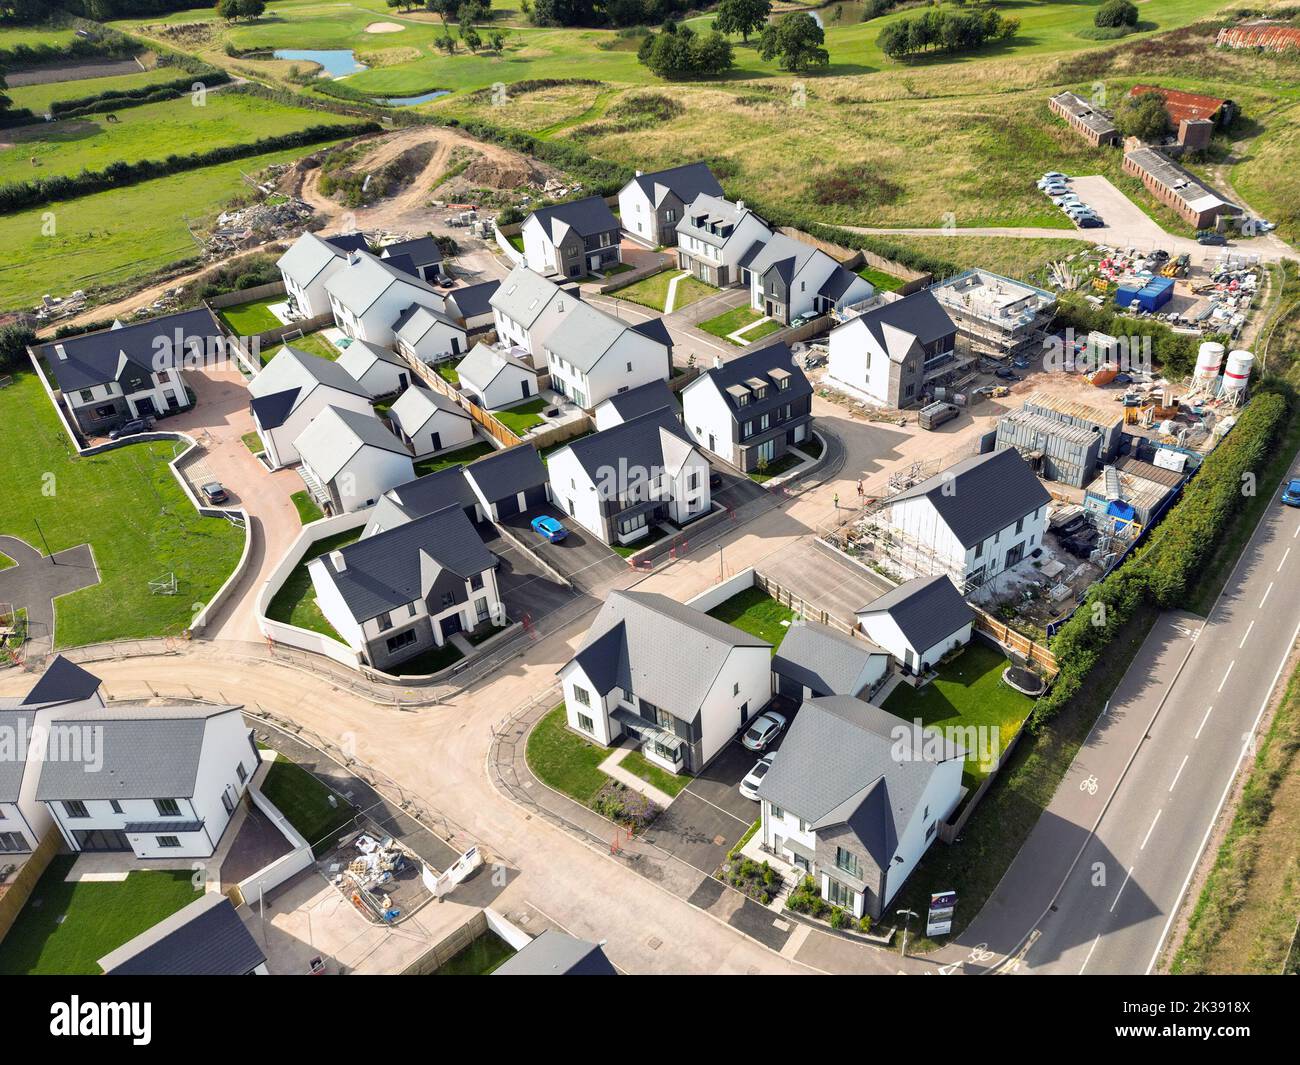 Bonvilston, Vale of Glamorgan, Wales - September 2022: Aerial view of a new development of luxury detached houses on the outskirts of Cardiff. Stock Photo